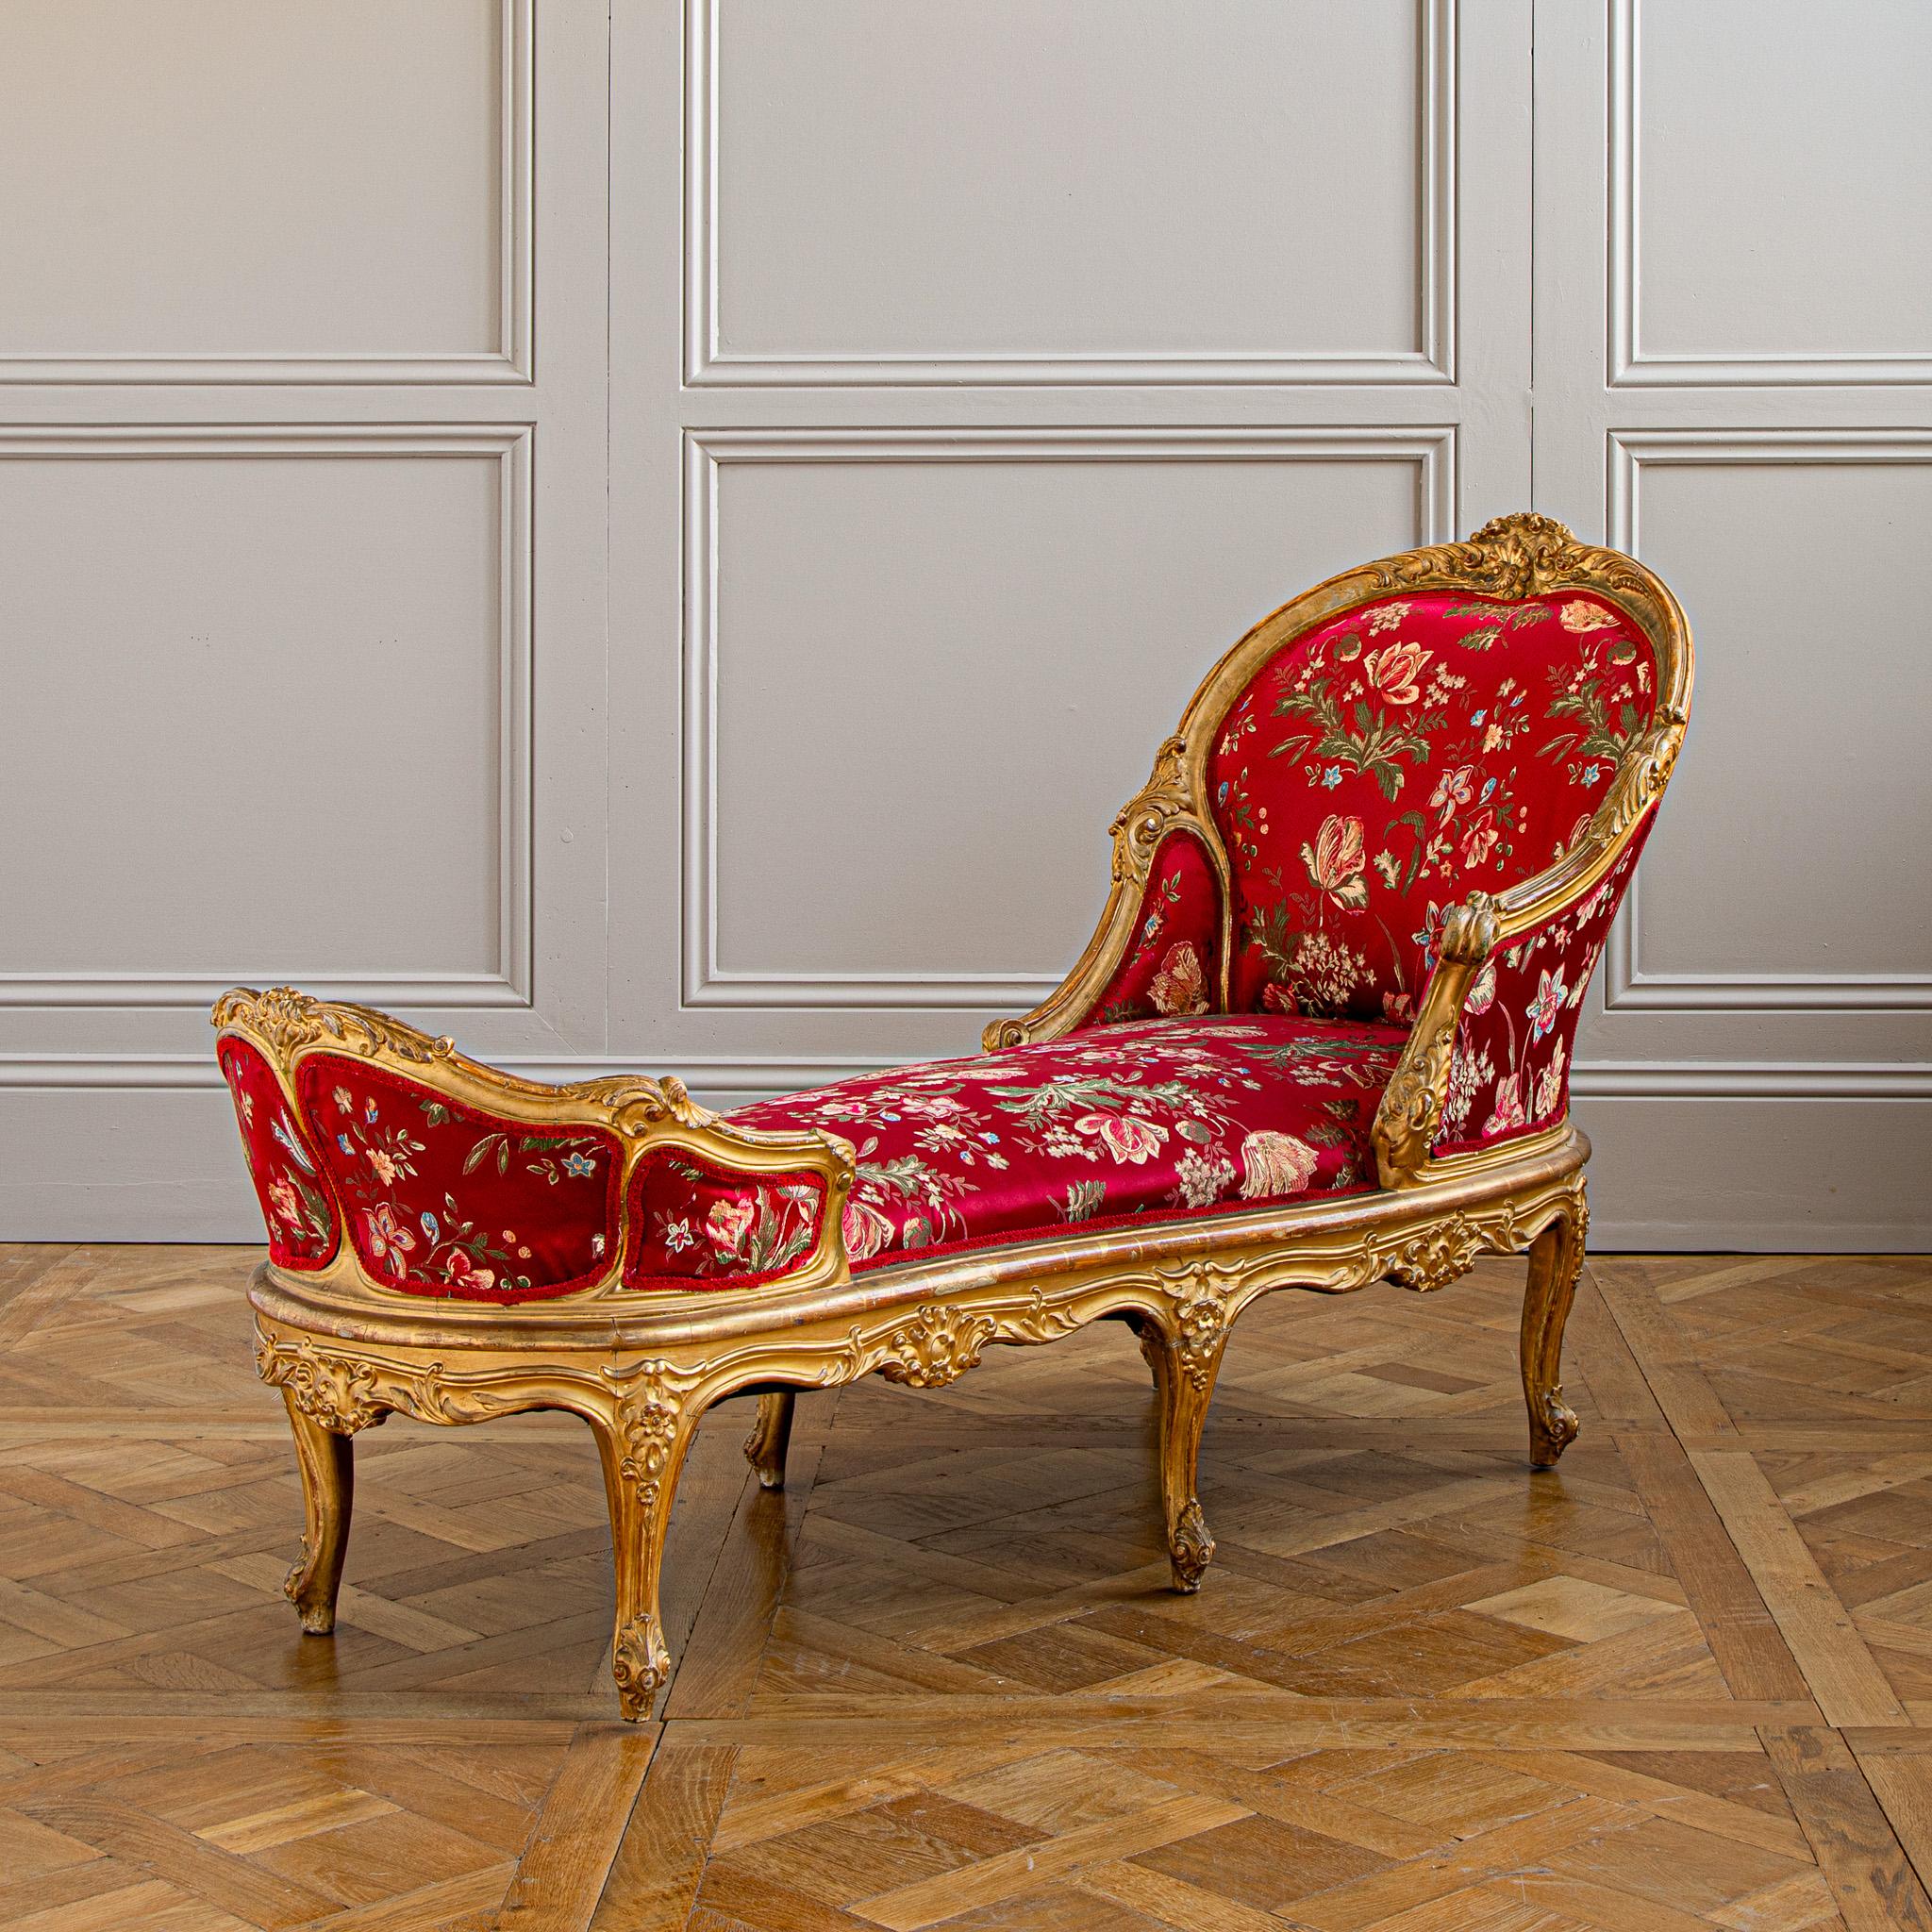 Circa 1880 Italian Giltwood LXV Style Chaise Longue For Sale 7